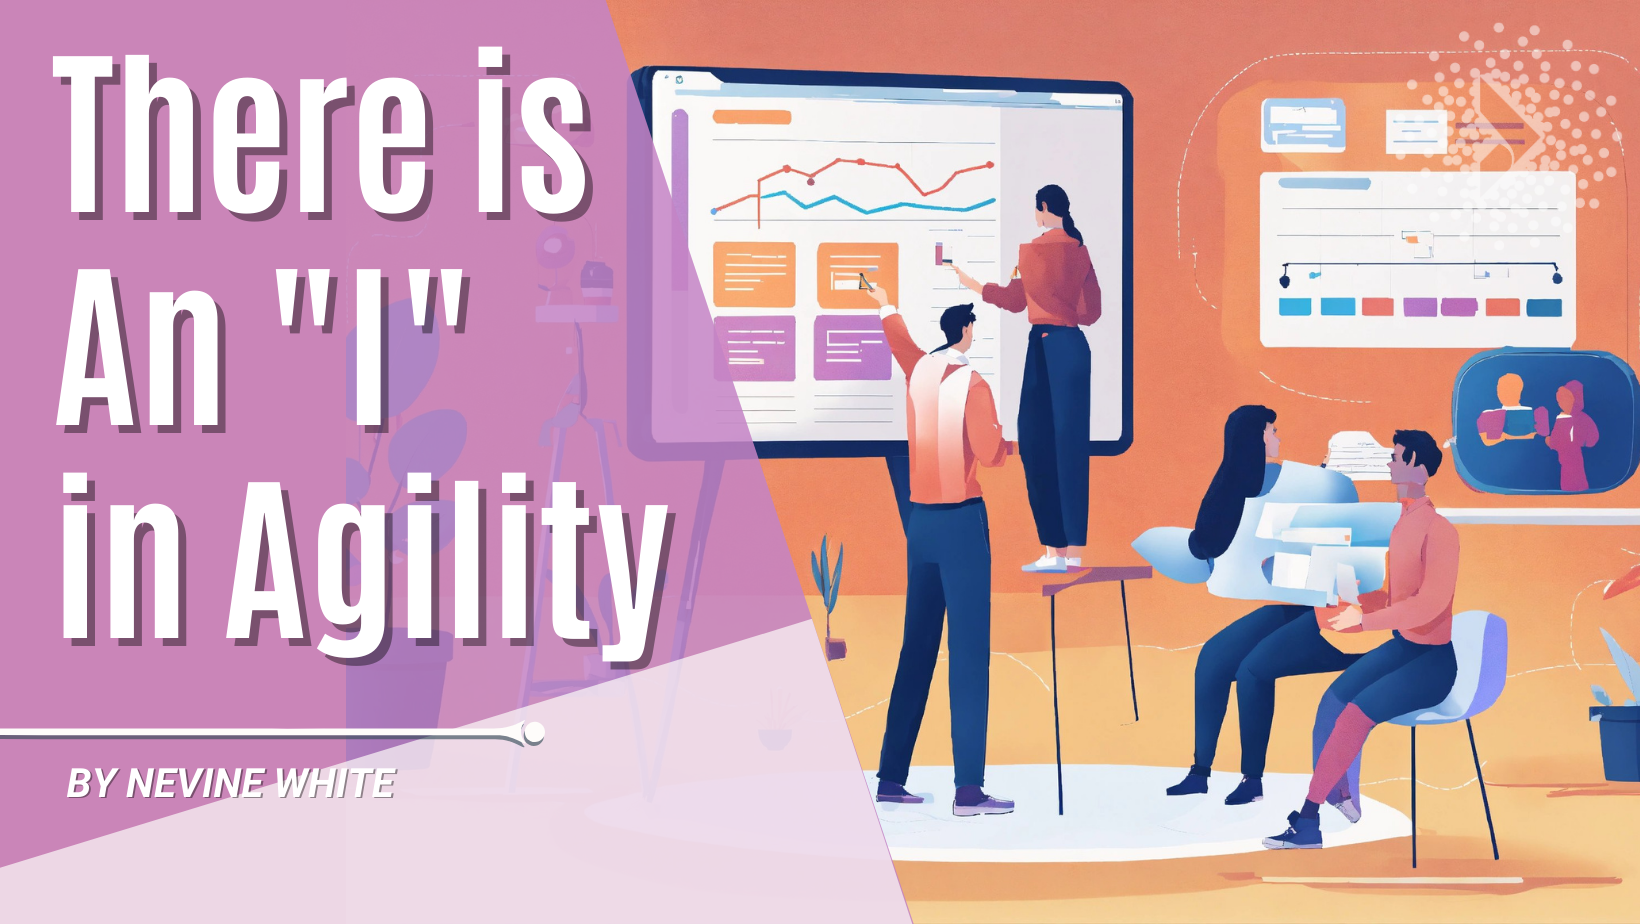 There is An "I" in Agility